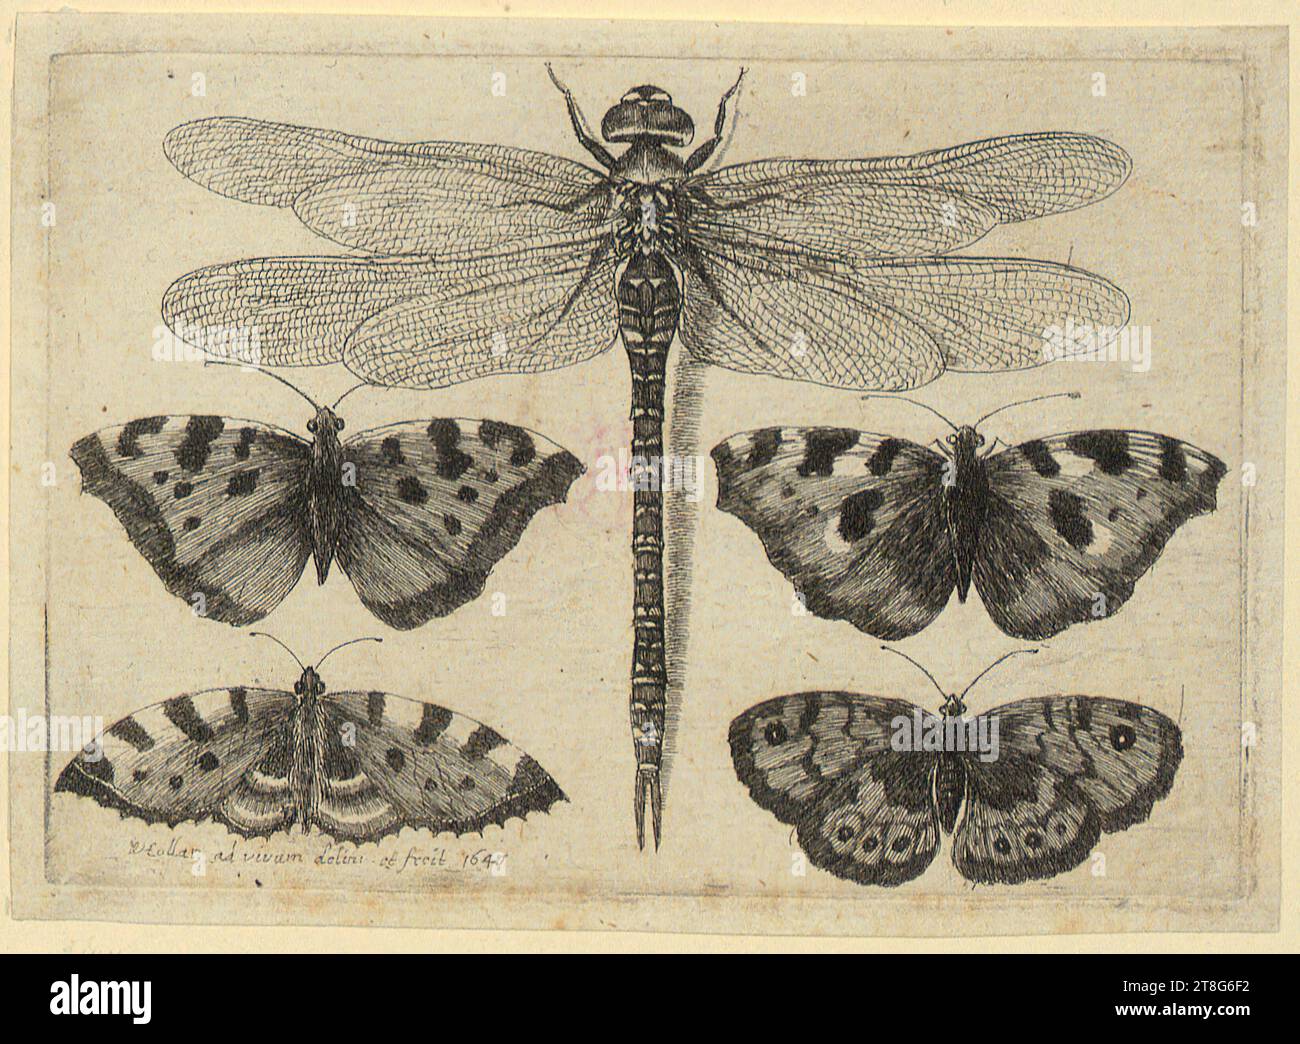 Wenzel Hollar (1607 - 1677), Dragonfly and four butterflies, print medium: 1647, etching, sheet size: 8.7 x 12.1 cm, signed and dated lower left 'WHollar ad vivum delin: et fecit 1647 Stock Photo